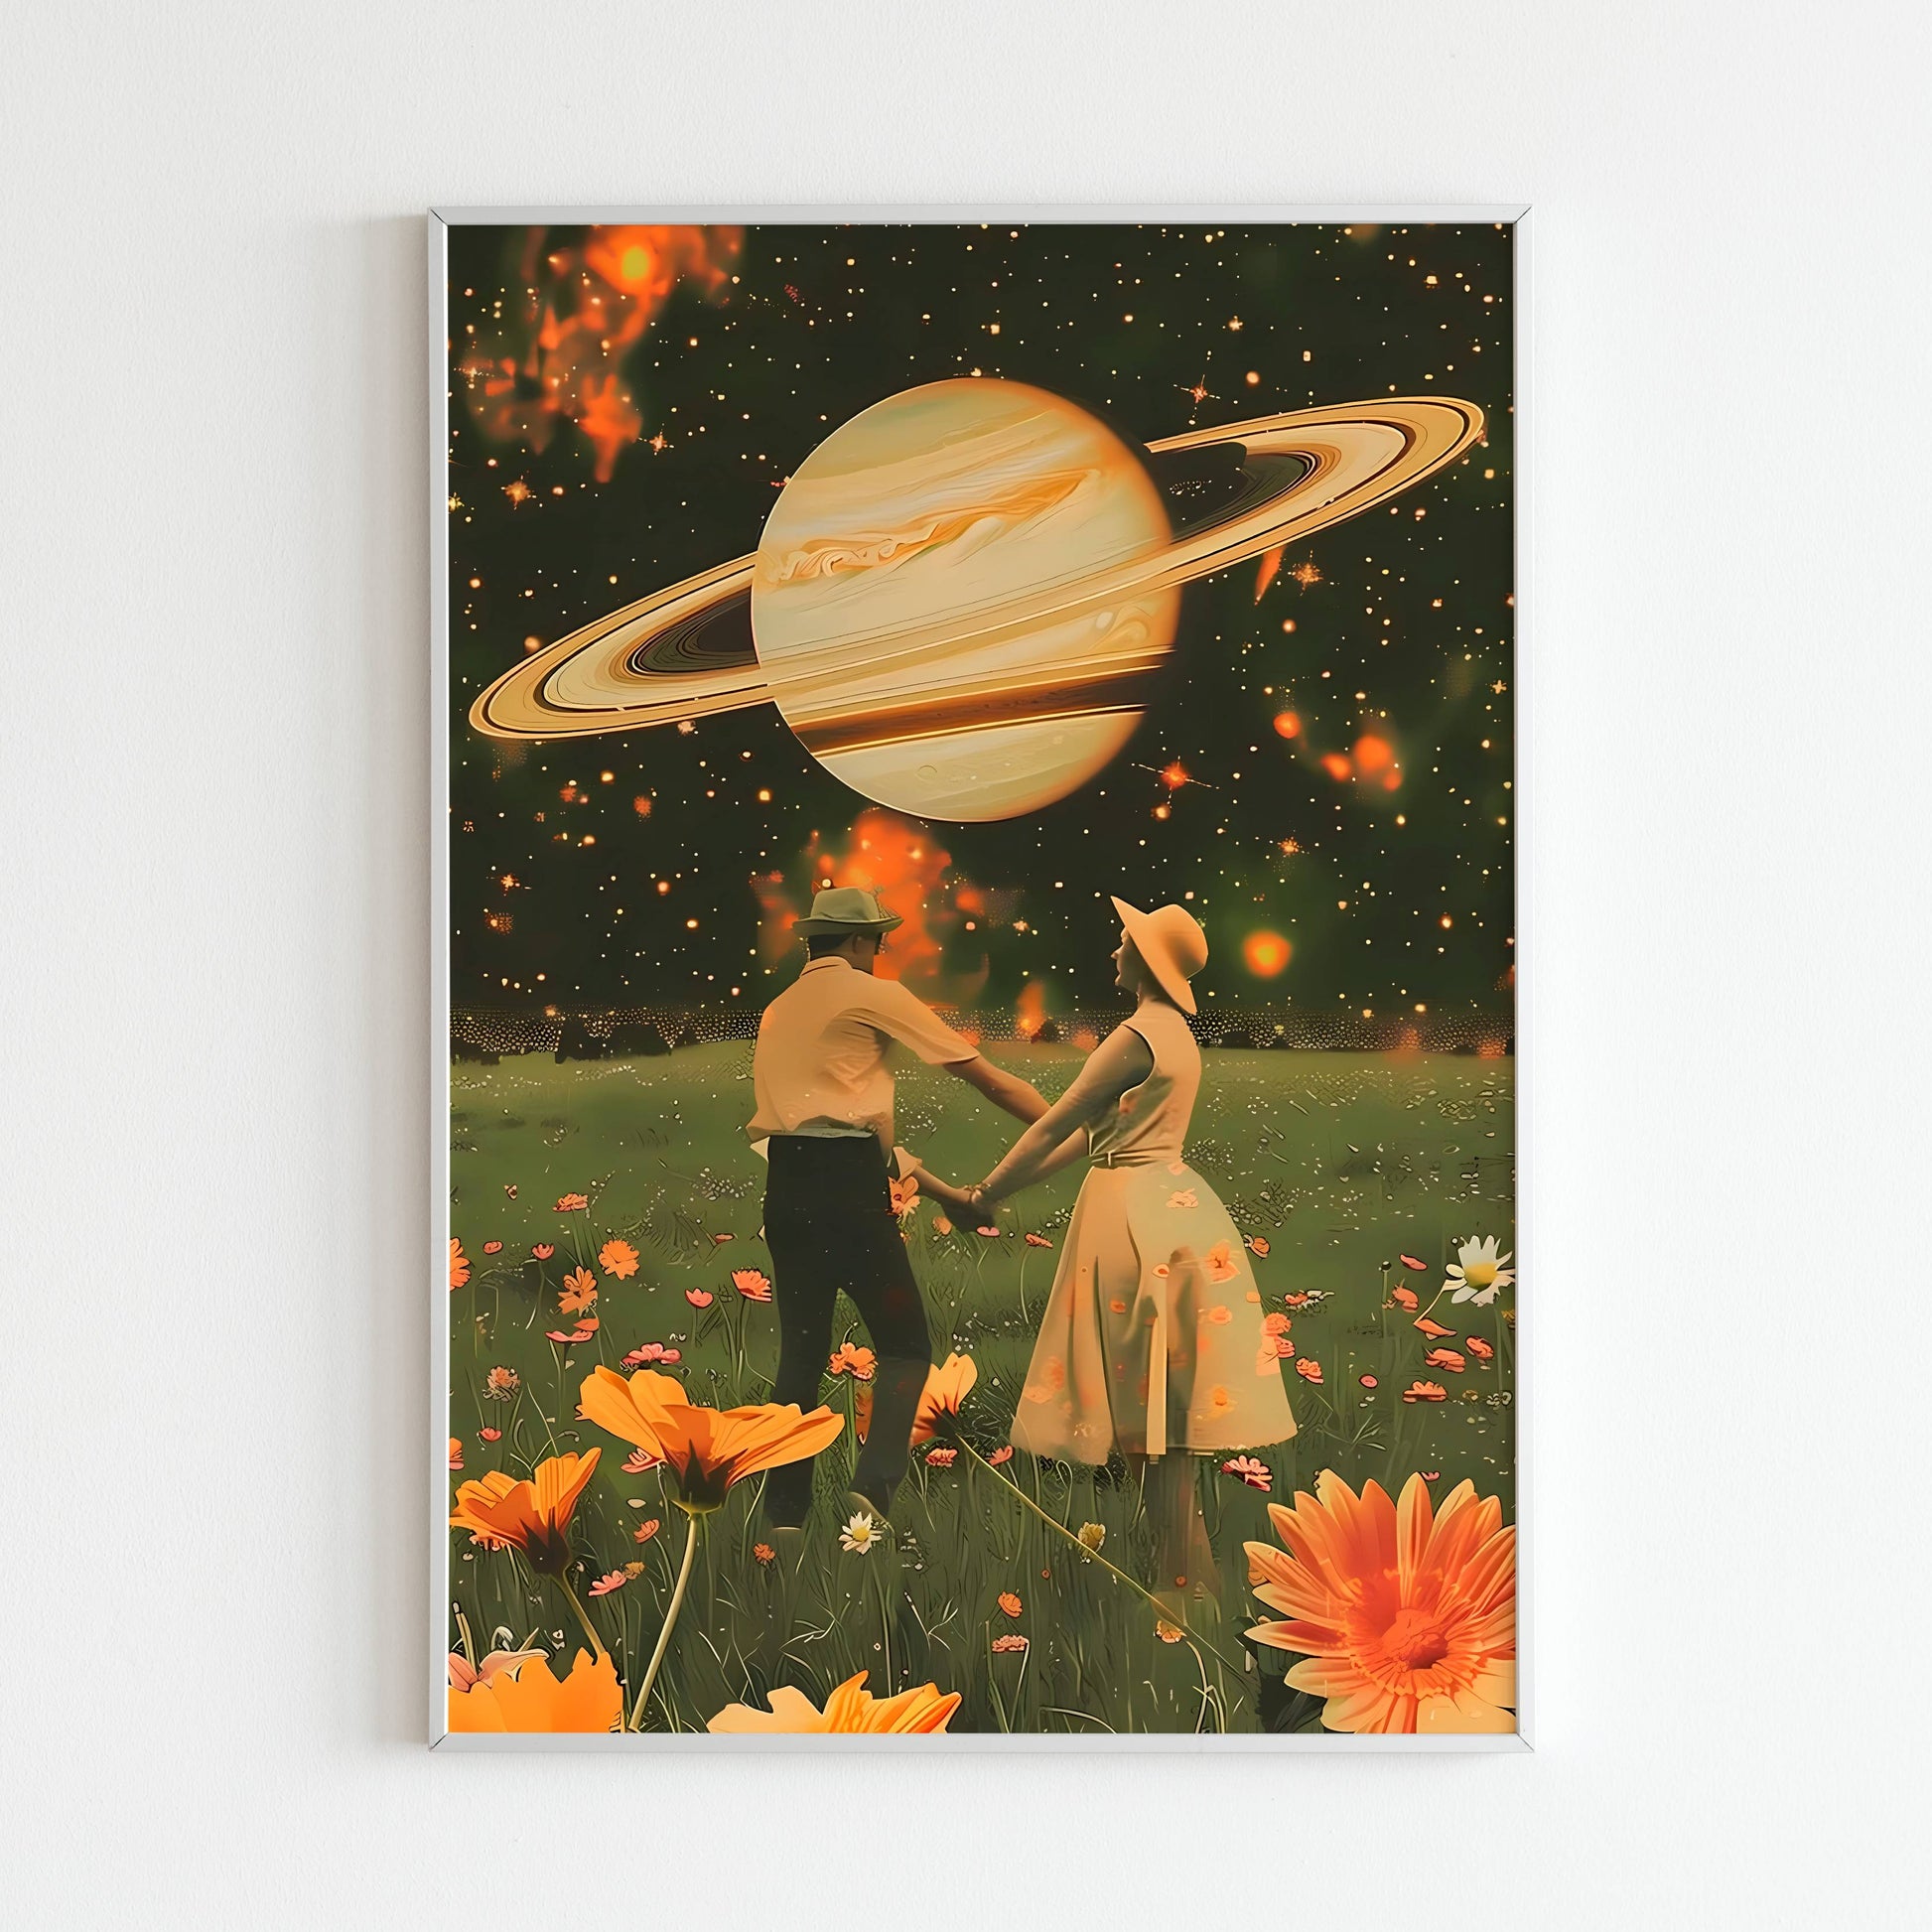 Experience the cosmic ballet of Saturn with this printable poster (physical or digital).